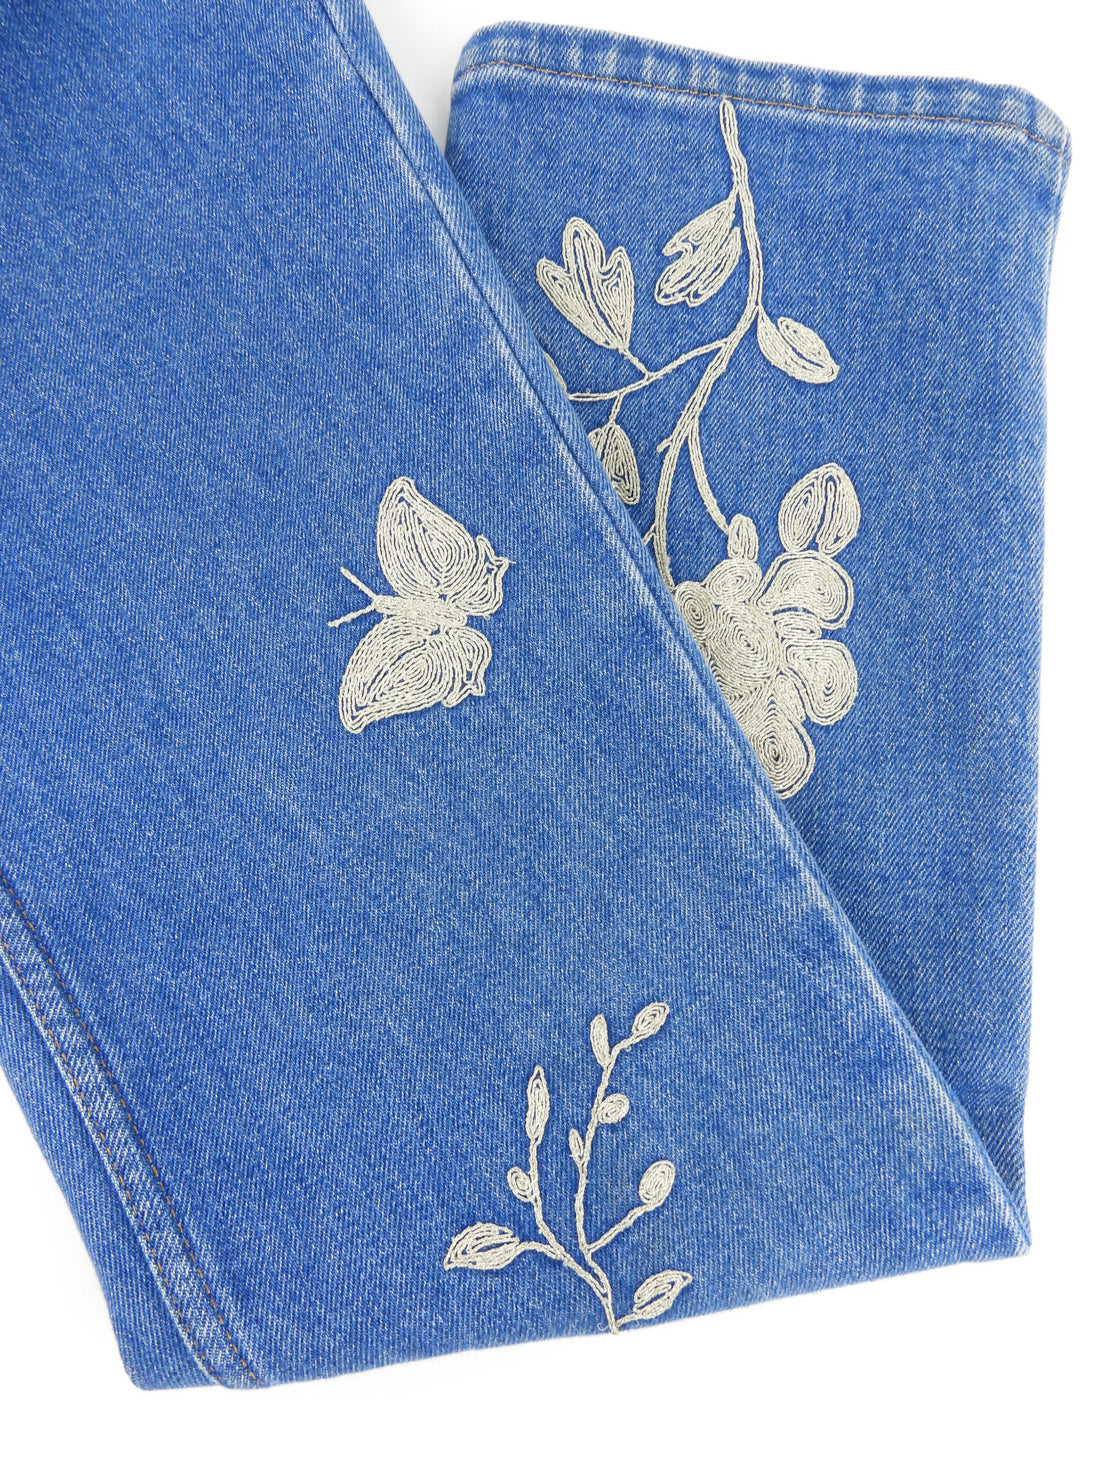 Gucci Blue Denim Silver Floral Embroidered Jeans - 25